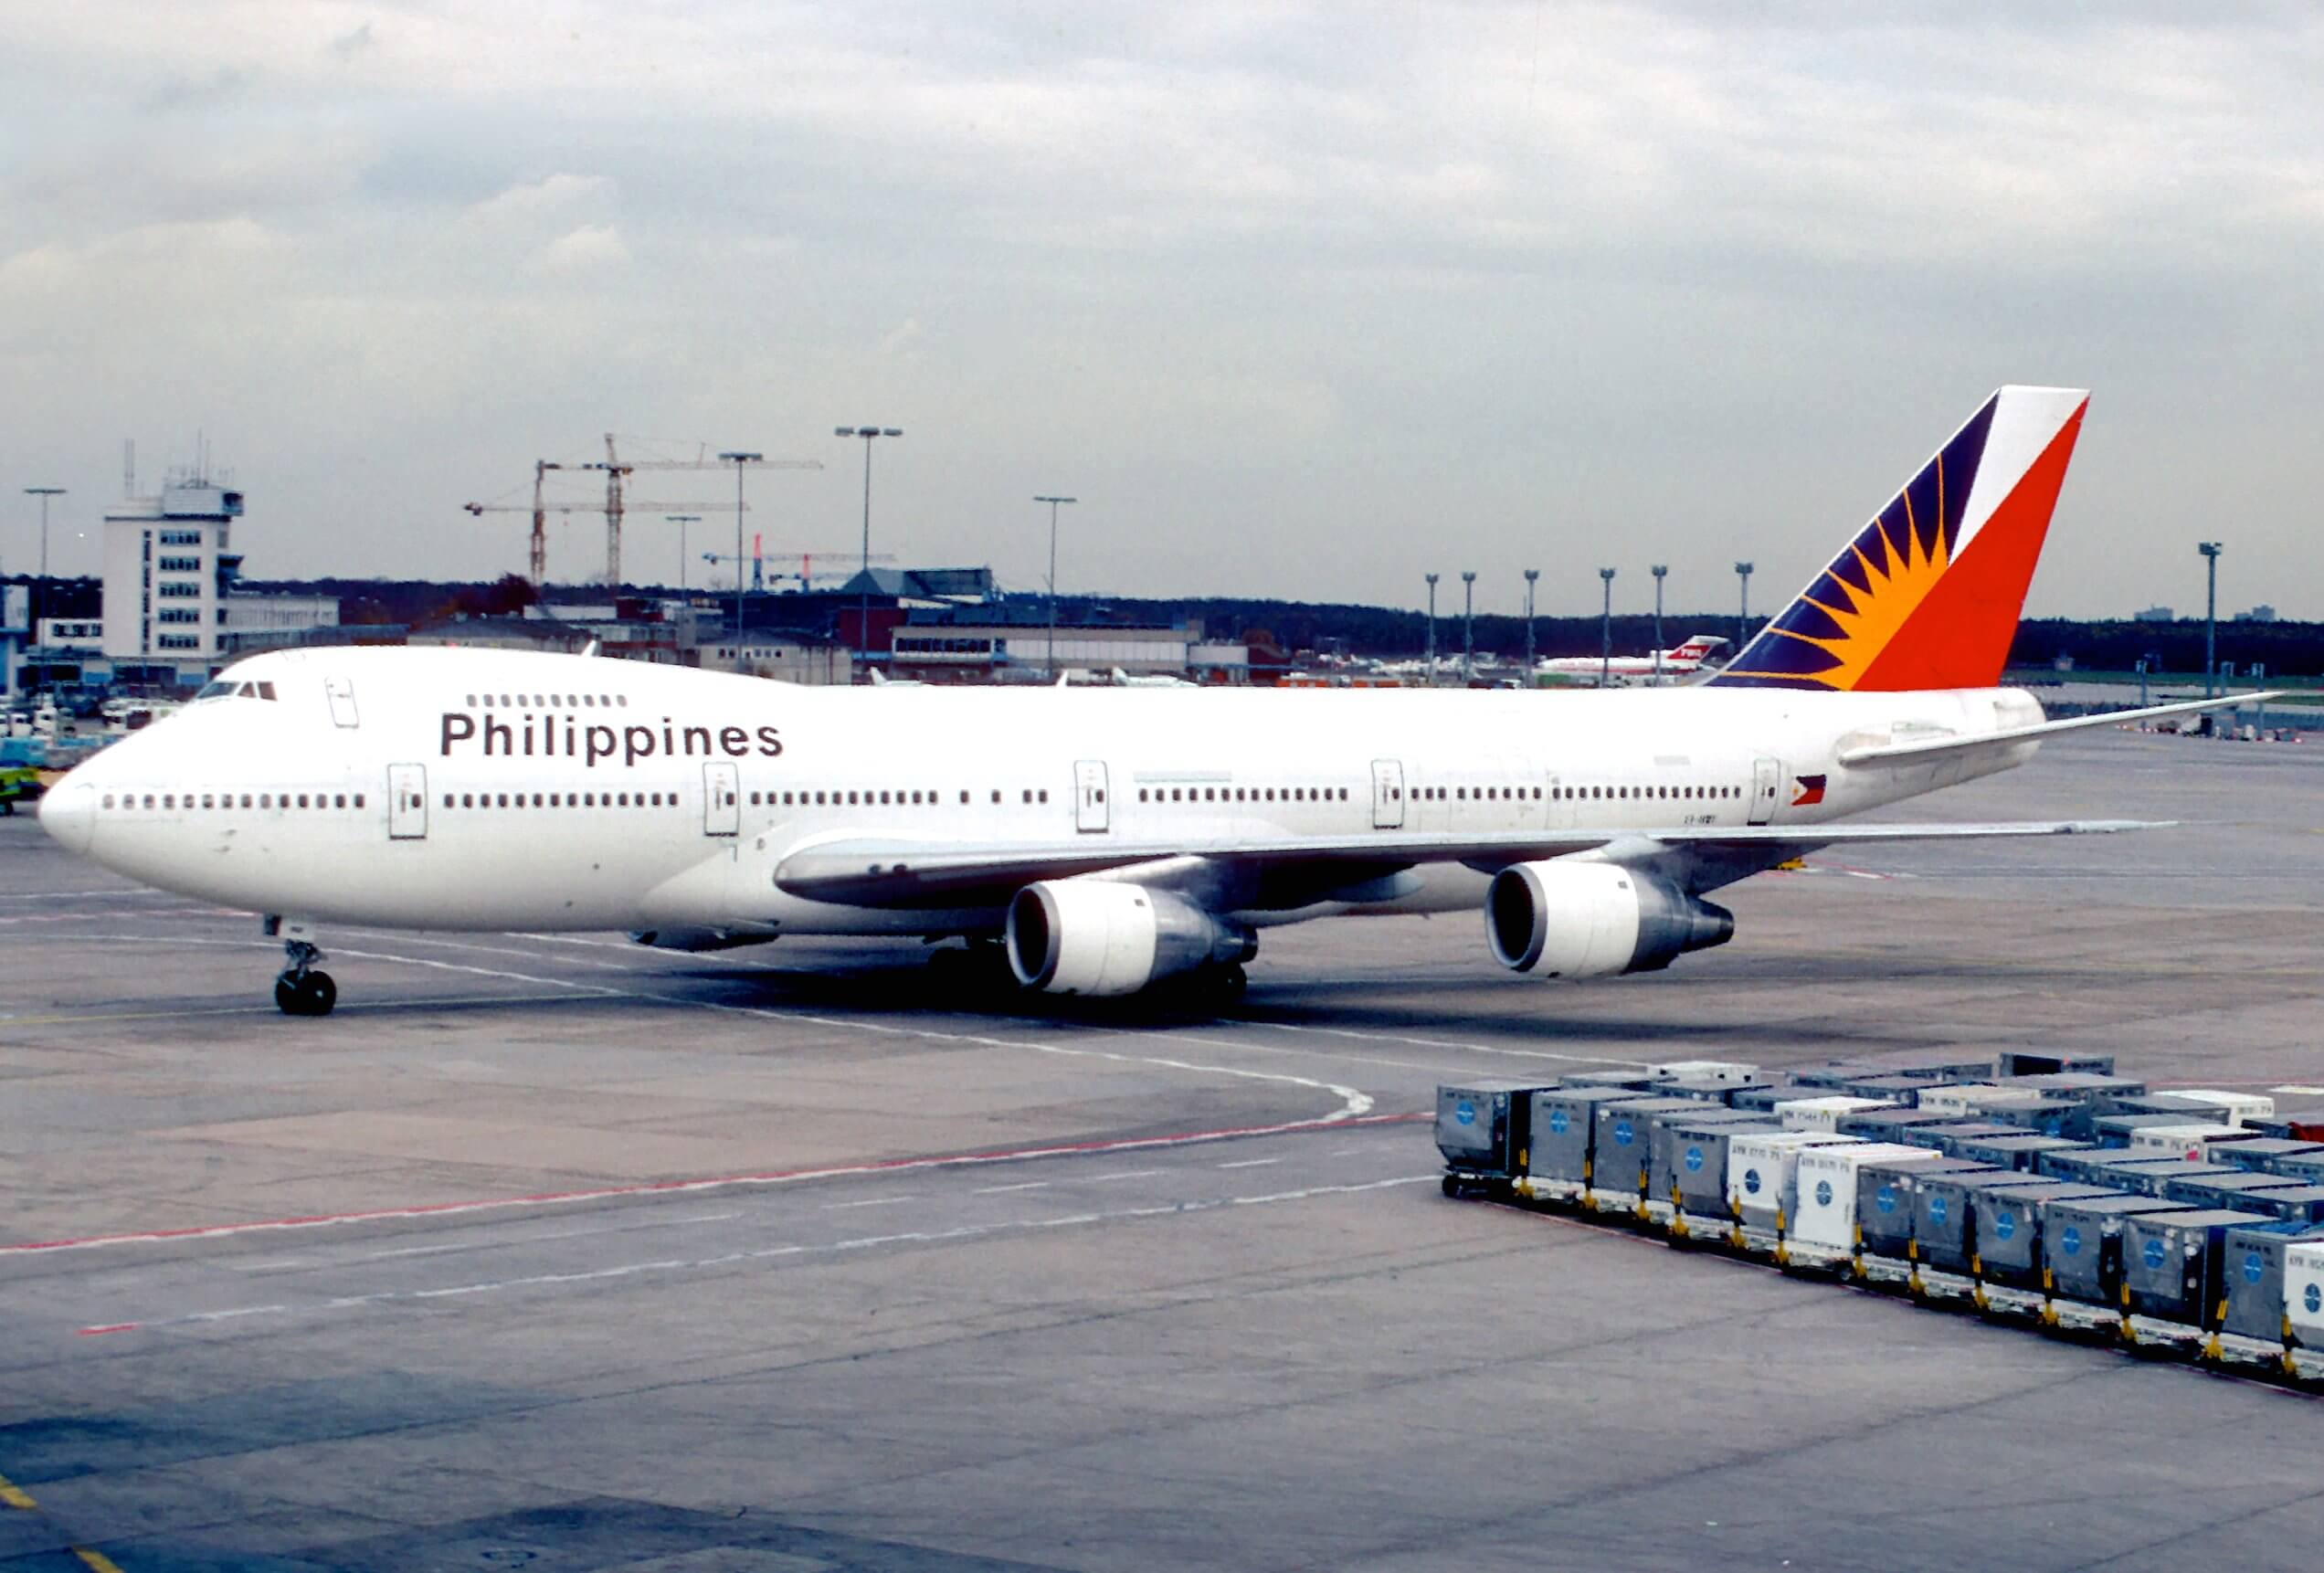 Philippine Airlines Flights From Lax To Manila Update Midfield Gates